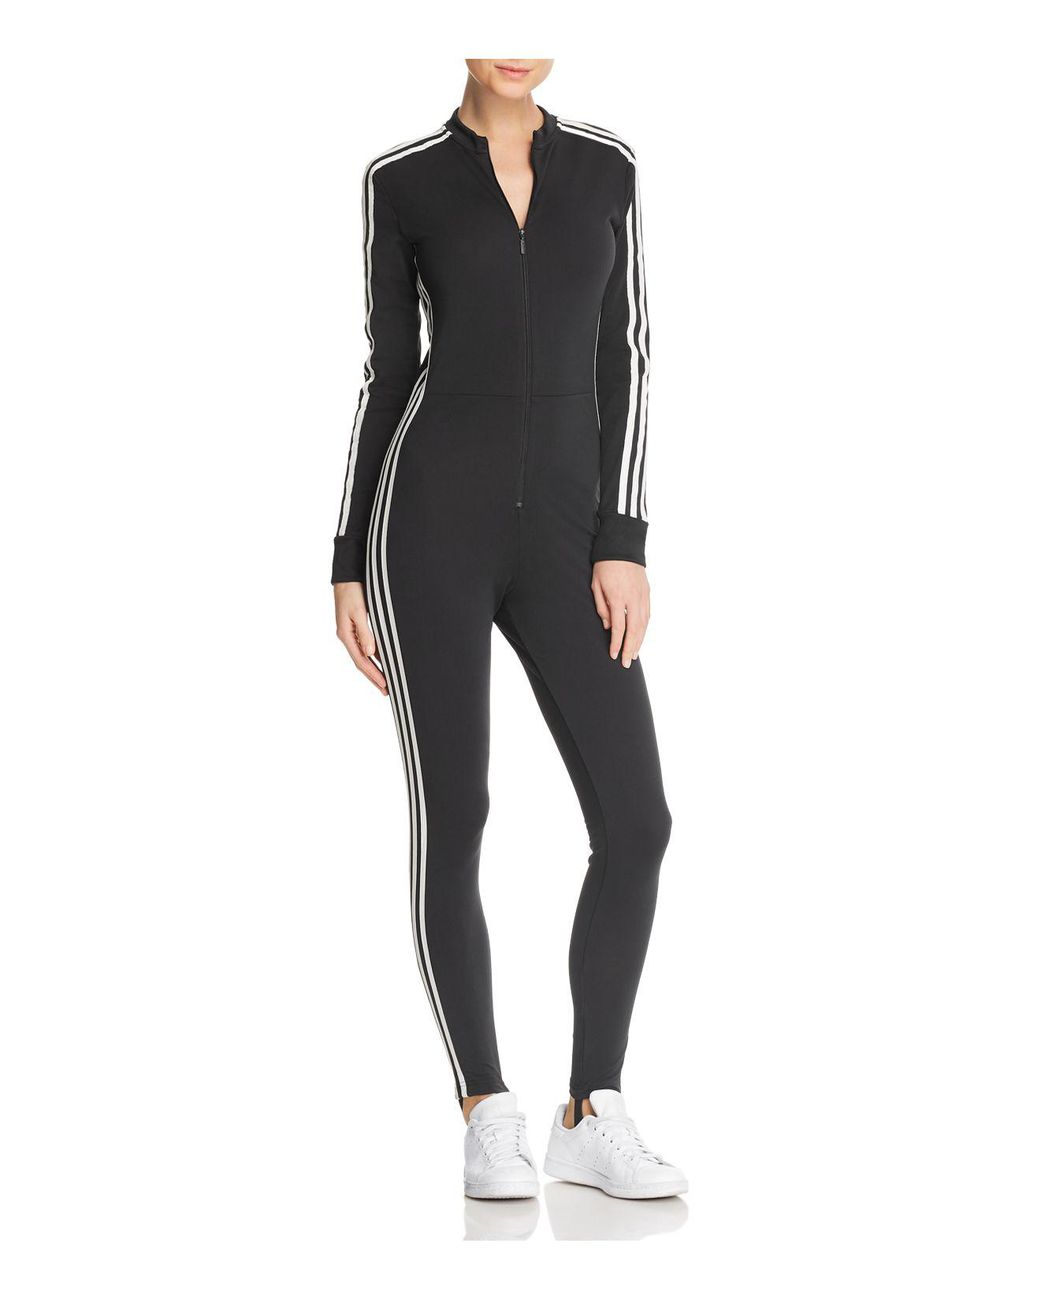 Messed up Lyrical Have learned adidas Originals Adicolor Jumpsuit in Black | Lyst